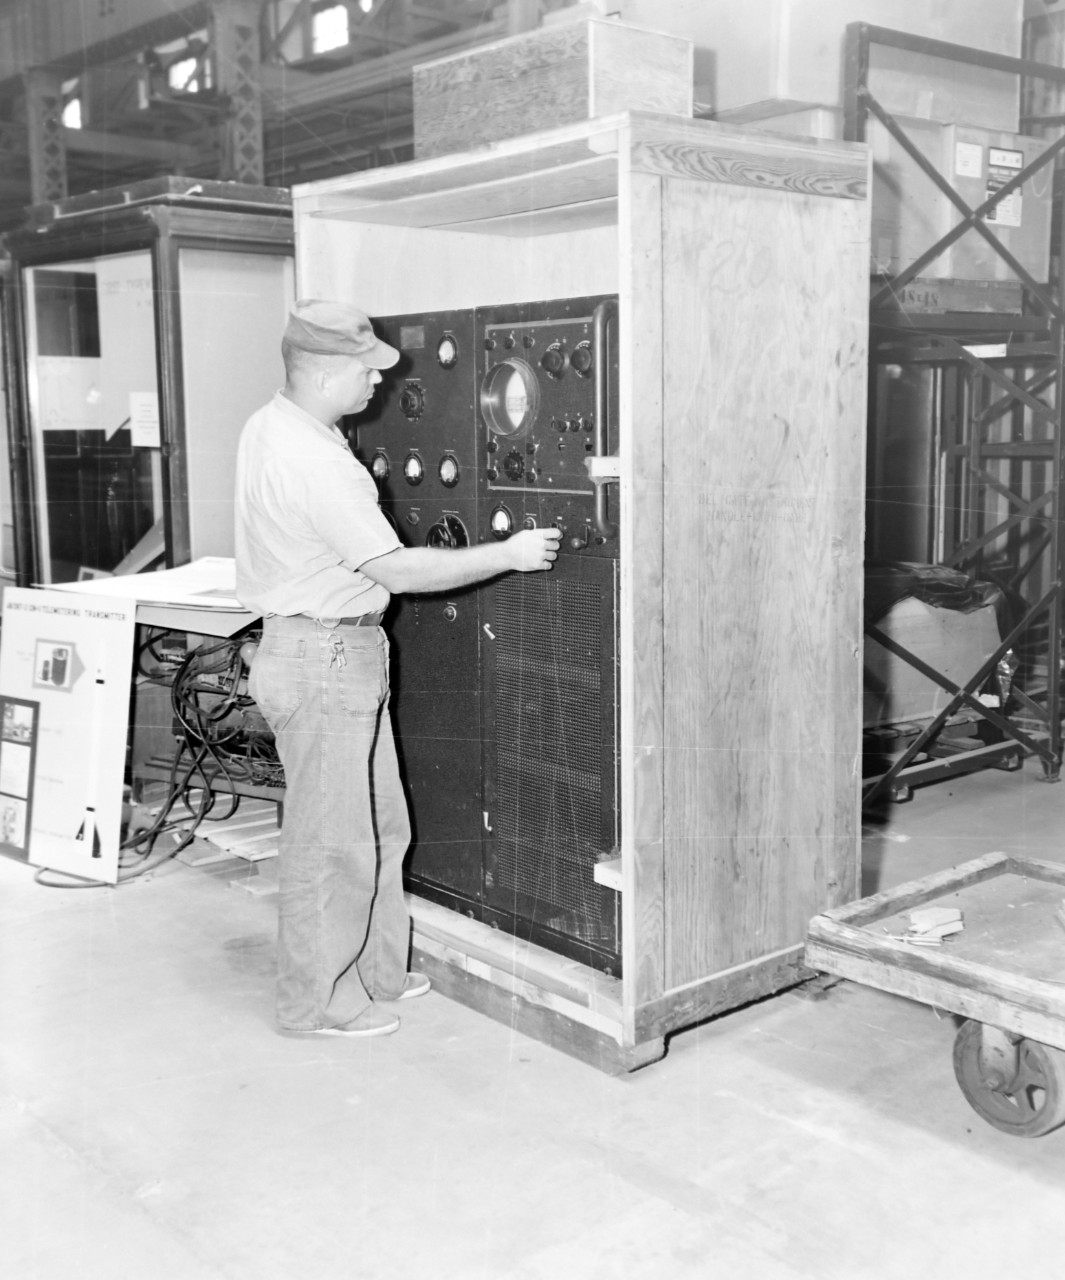 NMUSN-1022:   XAF Radar Receiver, 1960s.  Technician works on the receiver and transmitter after arriving at the Naval Historical Display Center for display.   The radar was developed by the Naval Research Laboratory.     Original is a black and white negative.   National Museum of the U.S. Navy Photograph Collection.